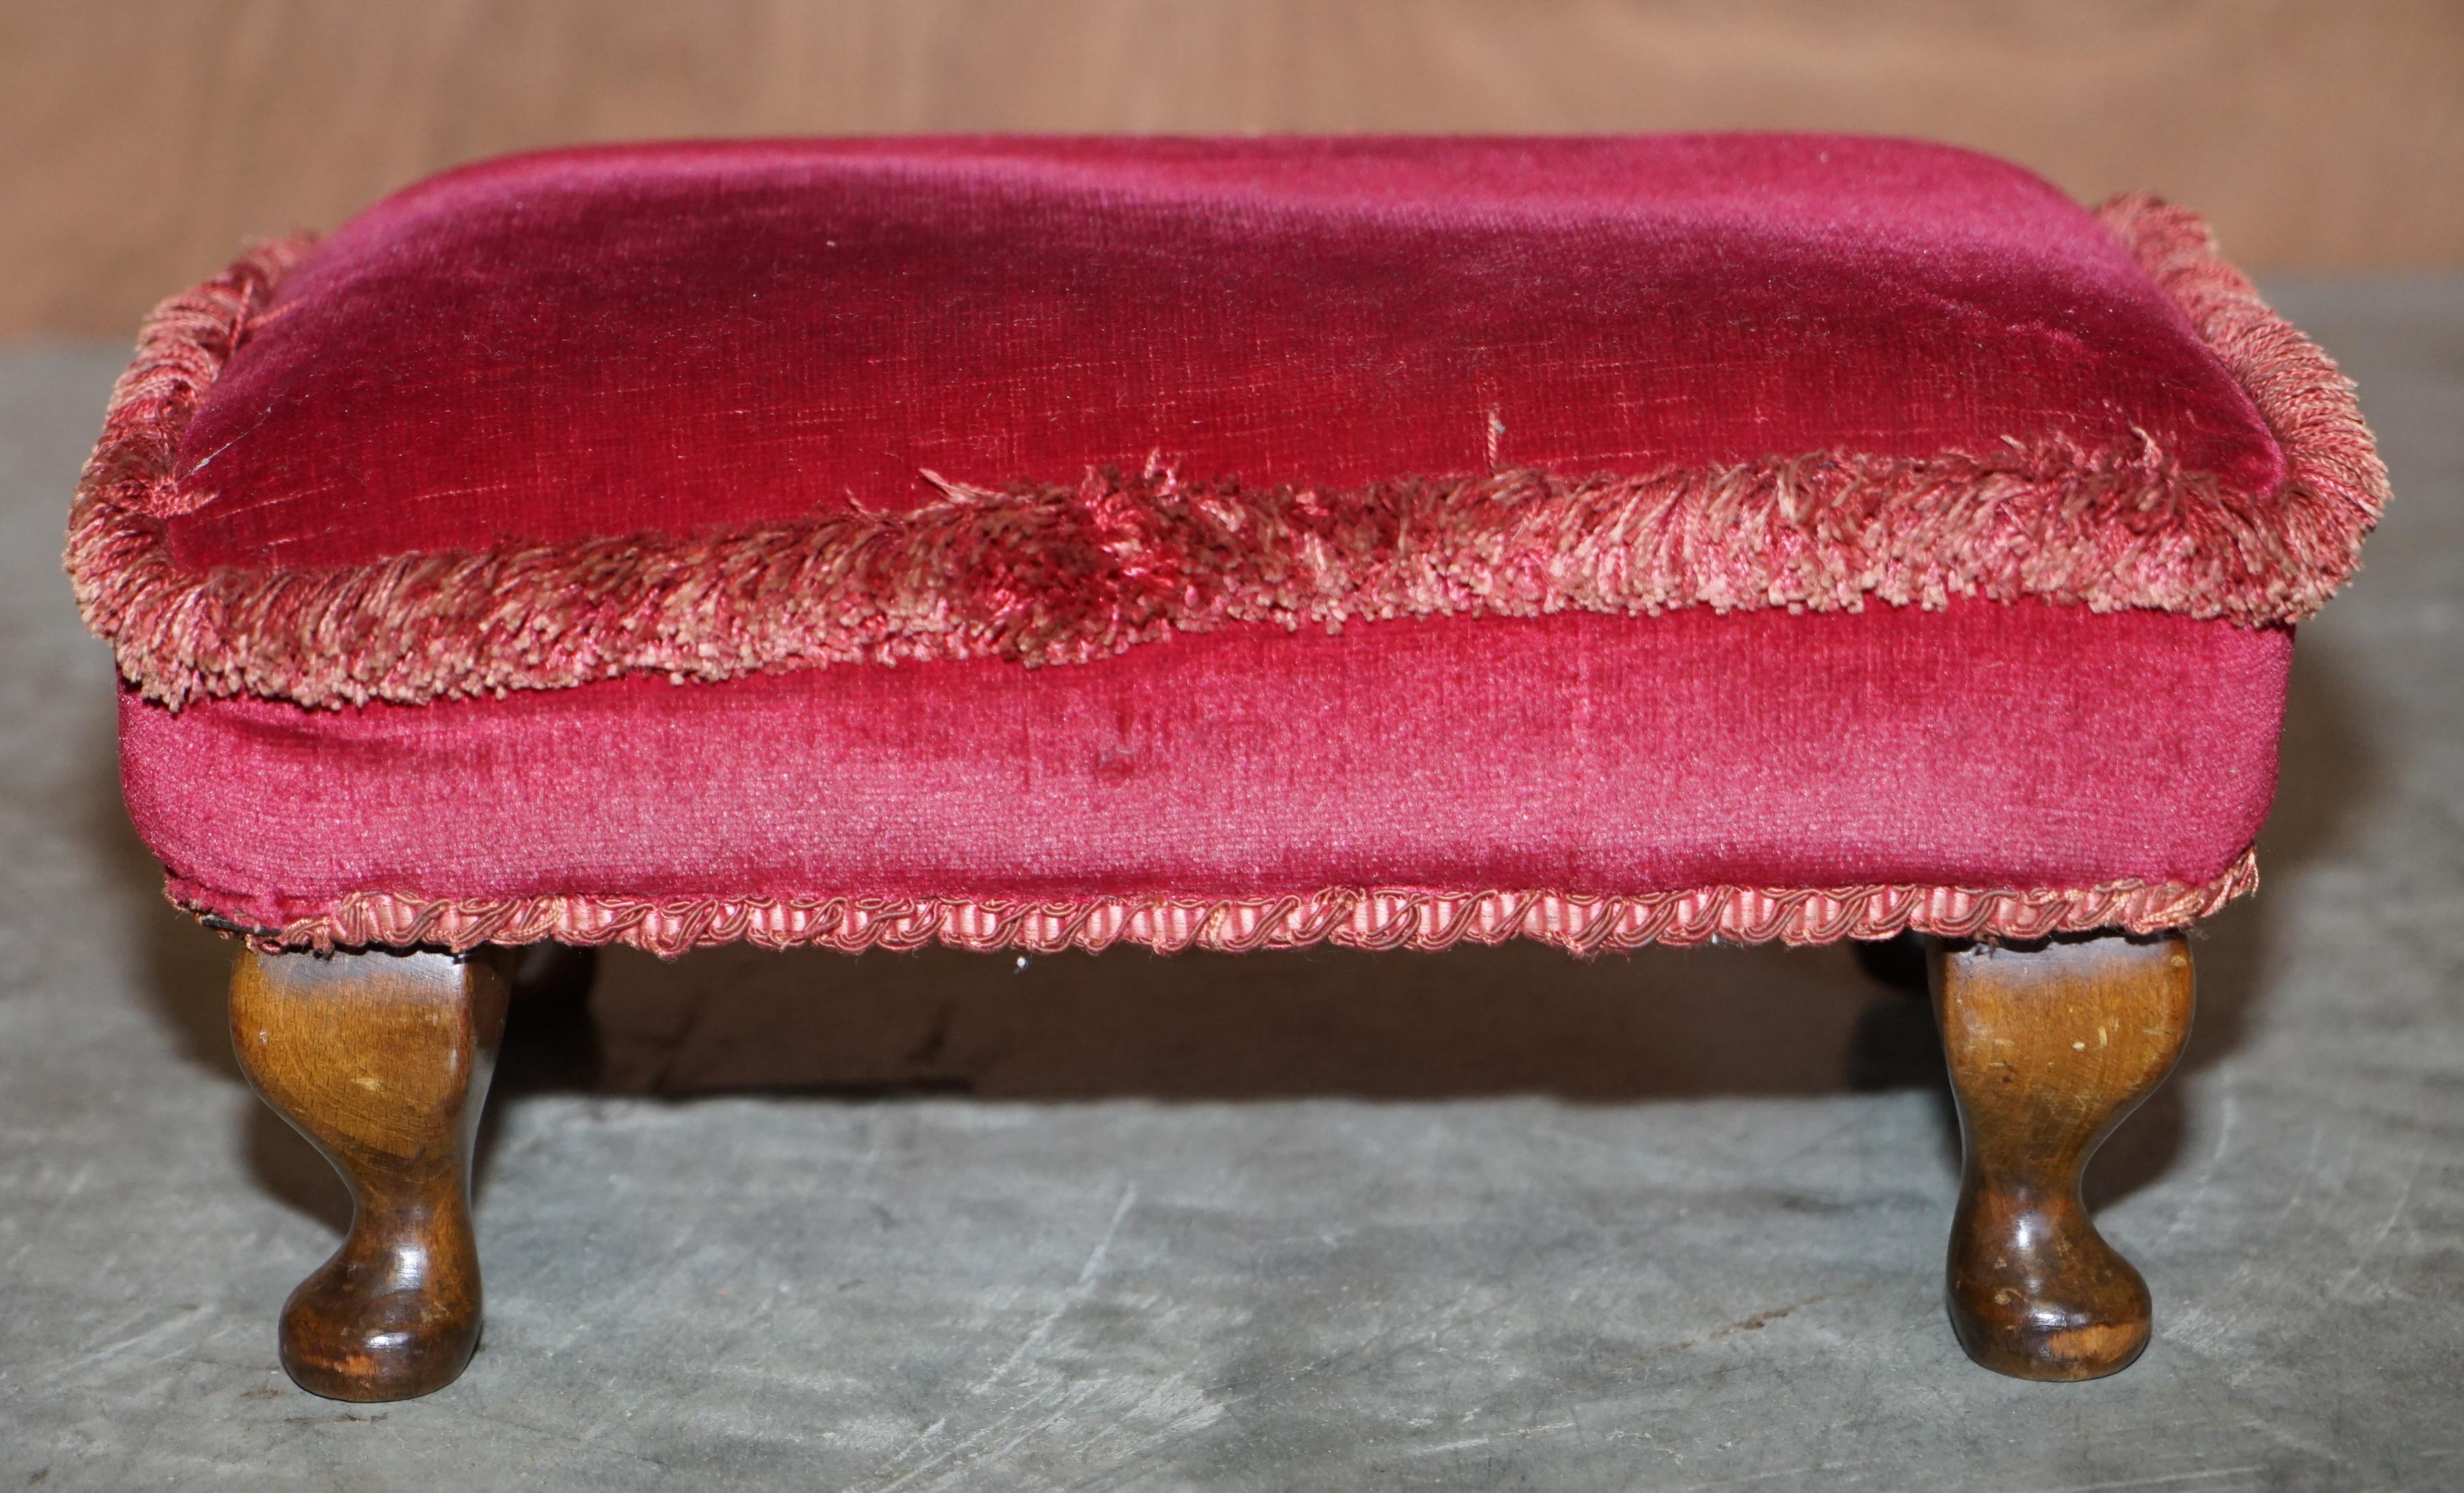 Antique Early Victorian Hardwood Footstool Pink Upholstery for Wingback Armchair 2